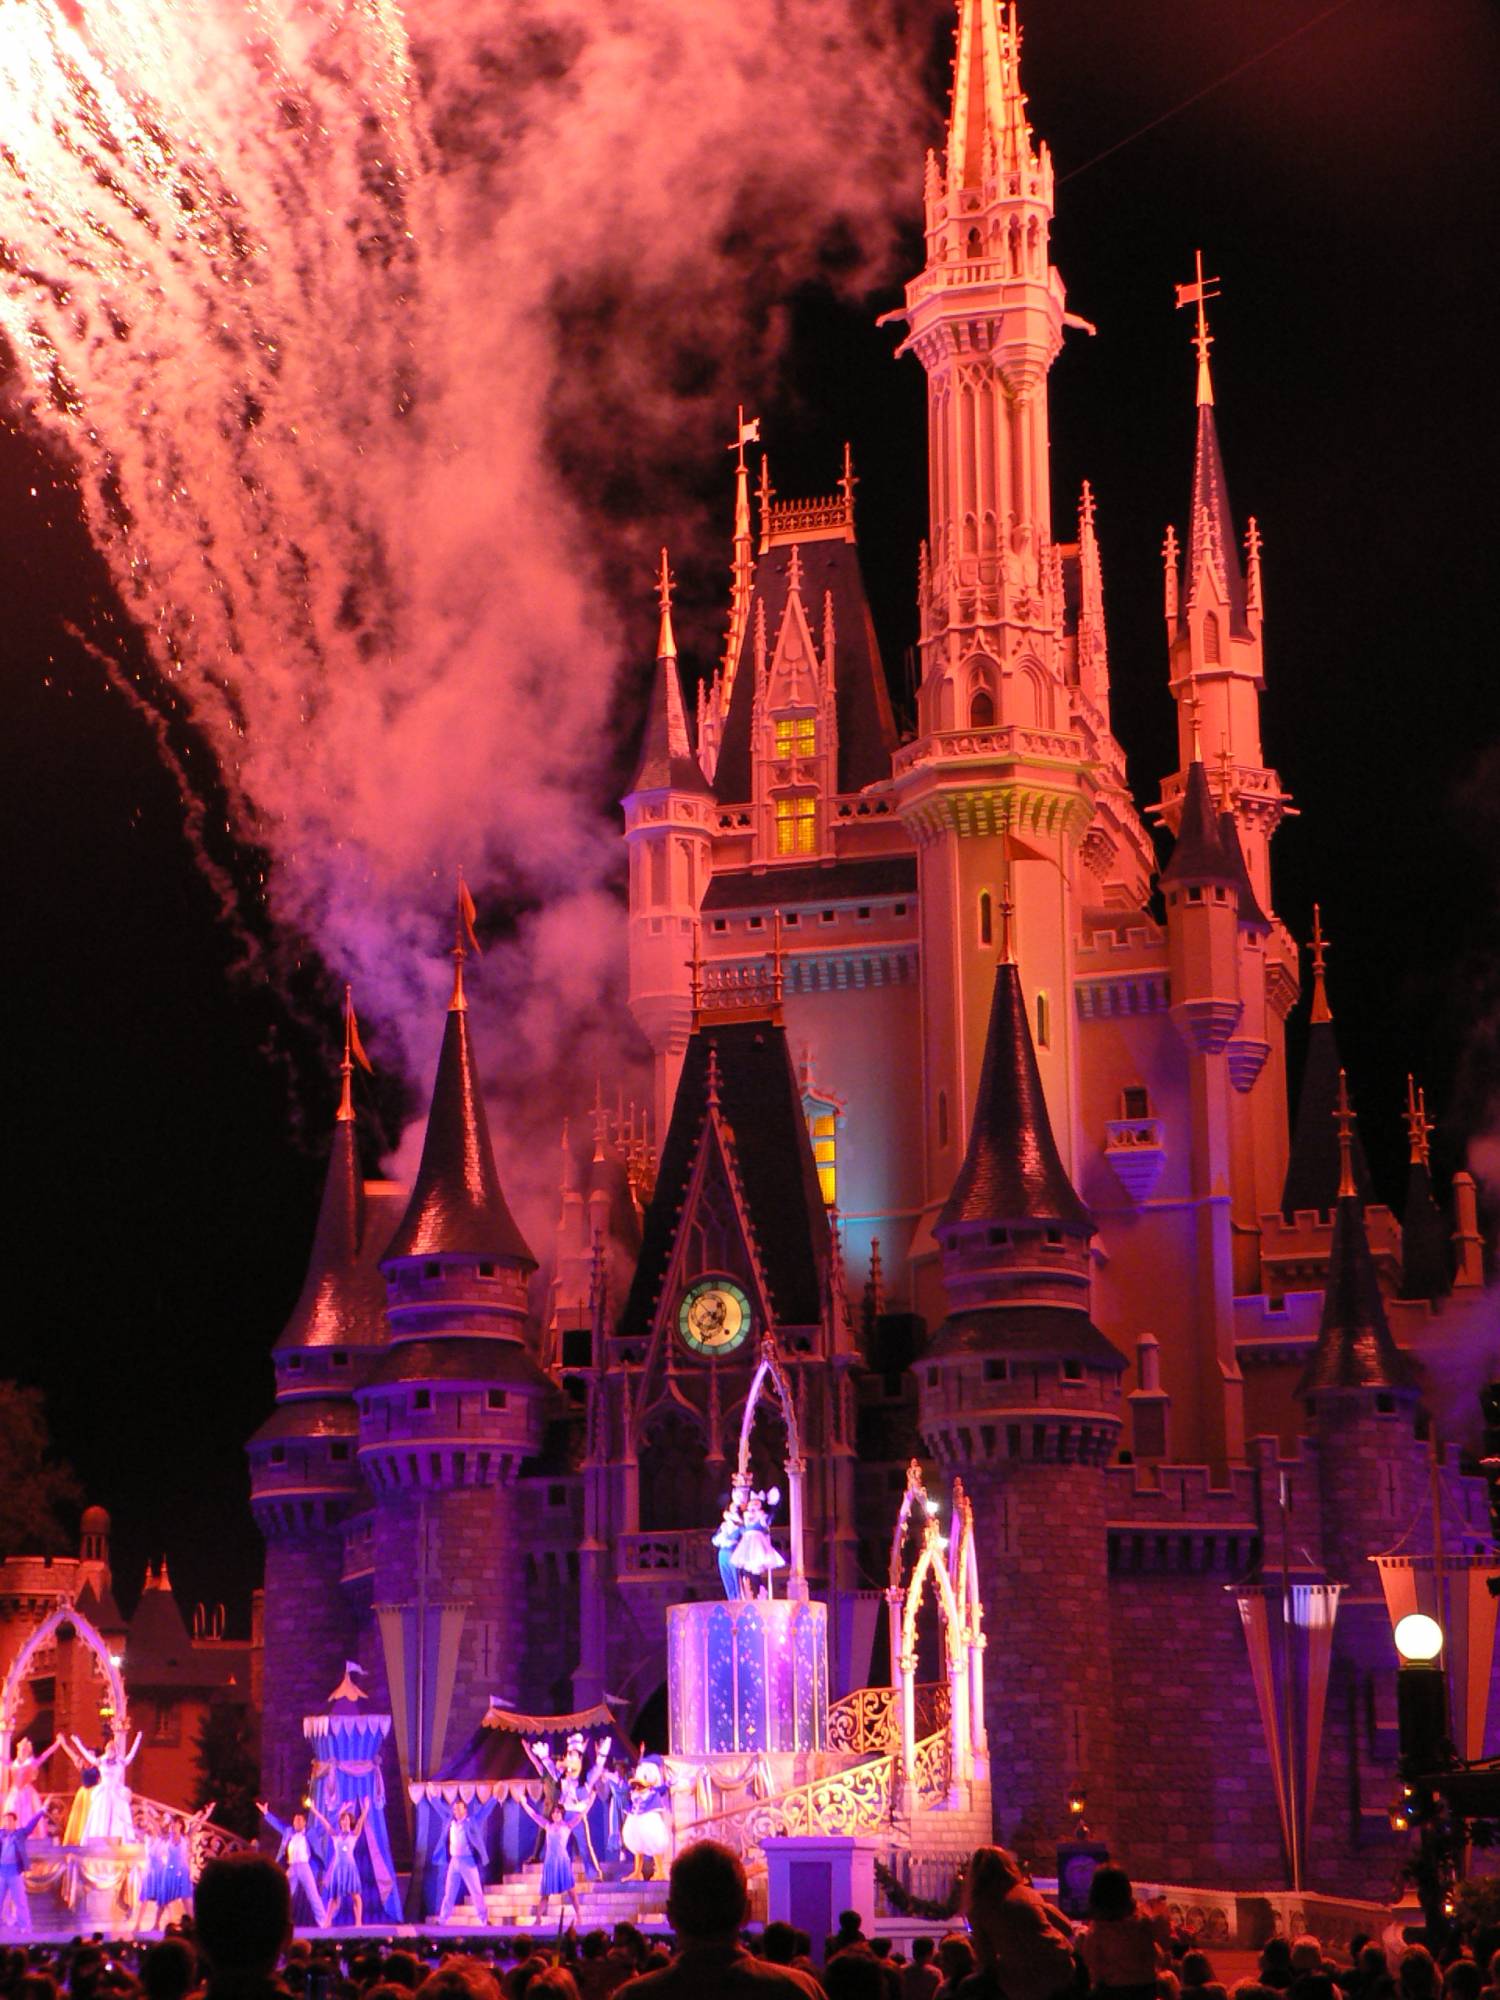 Cinderellas Castle show with fireworks